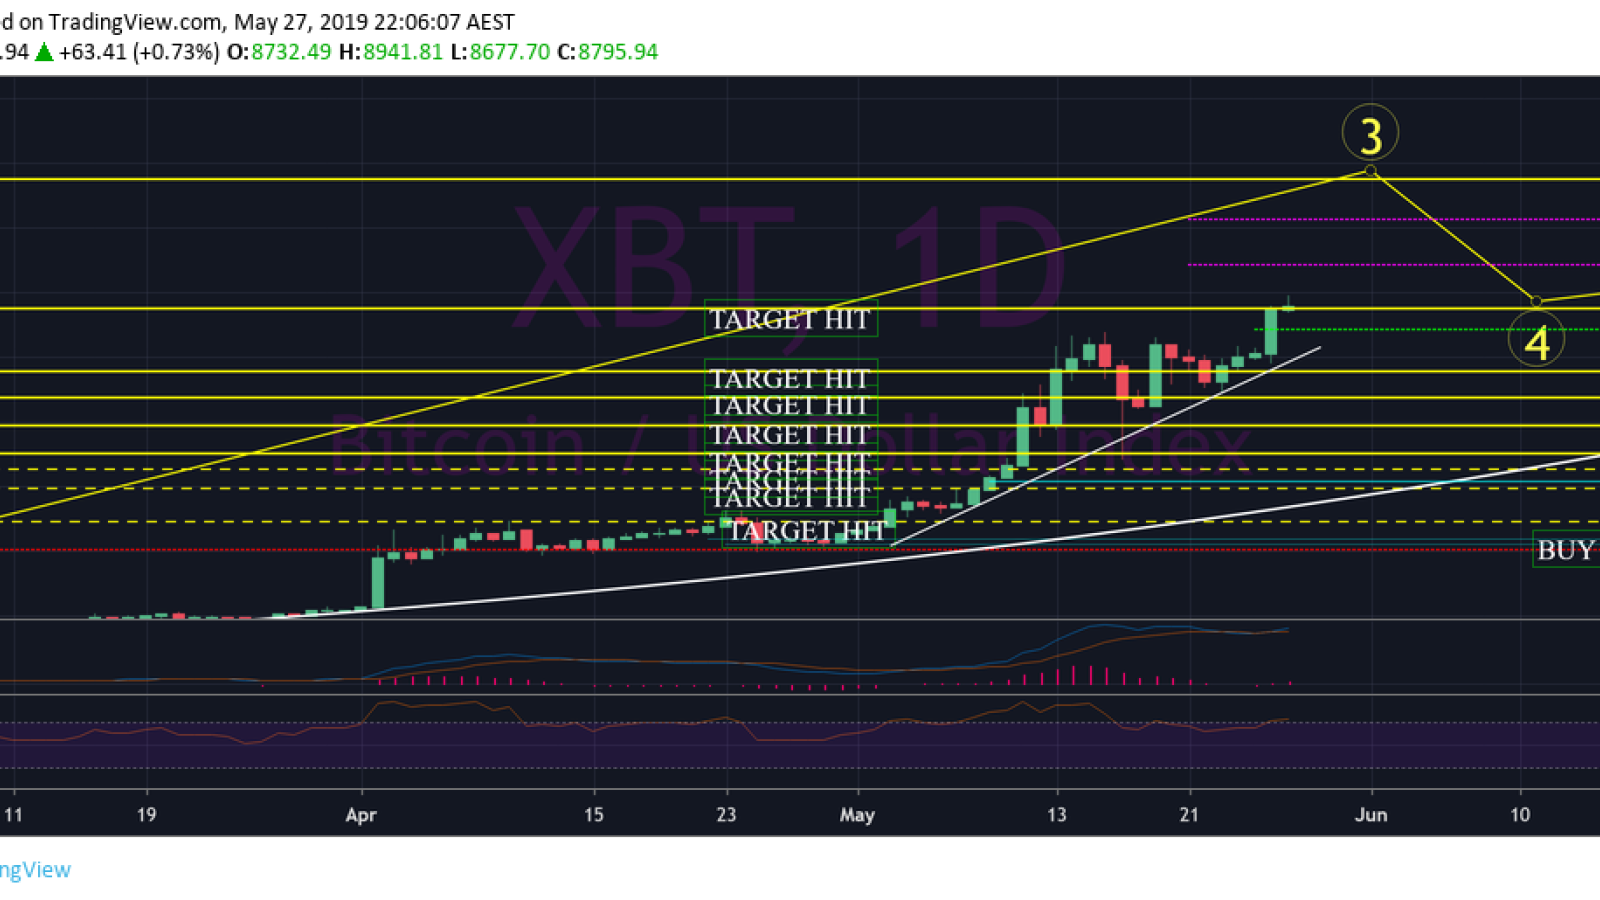 $10,750 is the highest target as for now